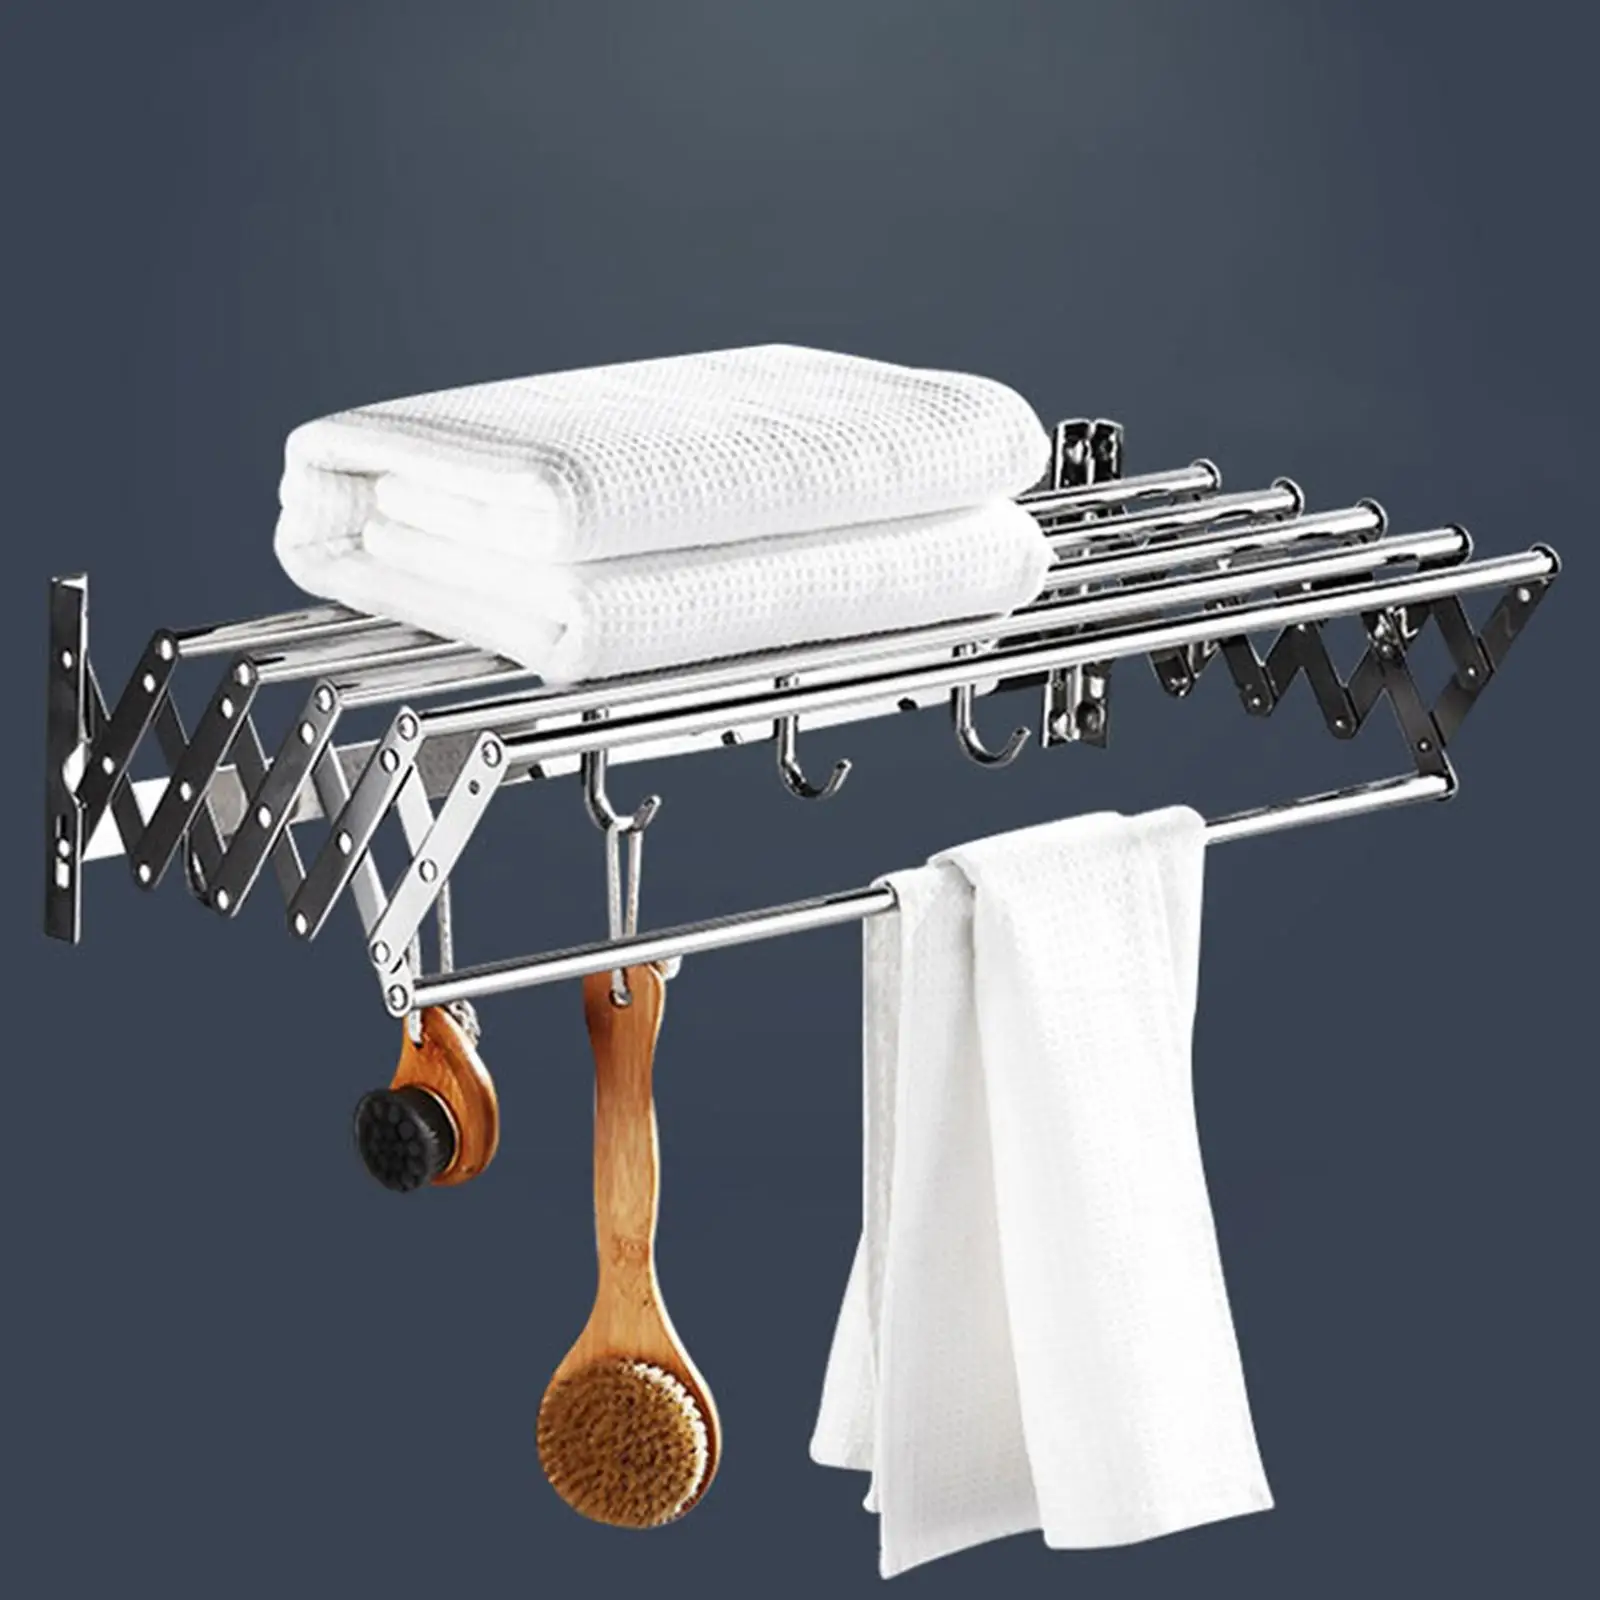 Wall Mount Retractable Towel Rack Expandable Clothes Drying Rack for Bathroom Laundry Room Hanging Garments Utility Area Balcony